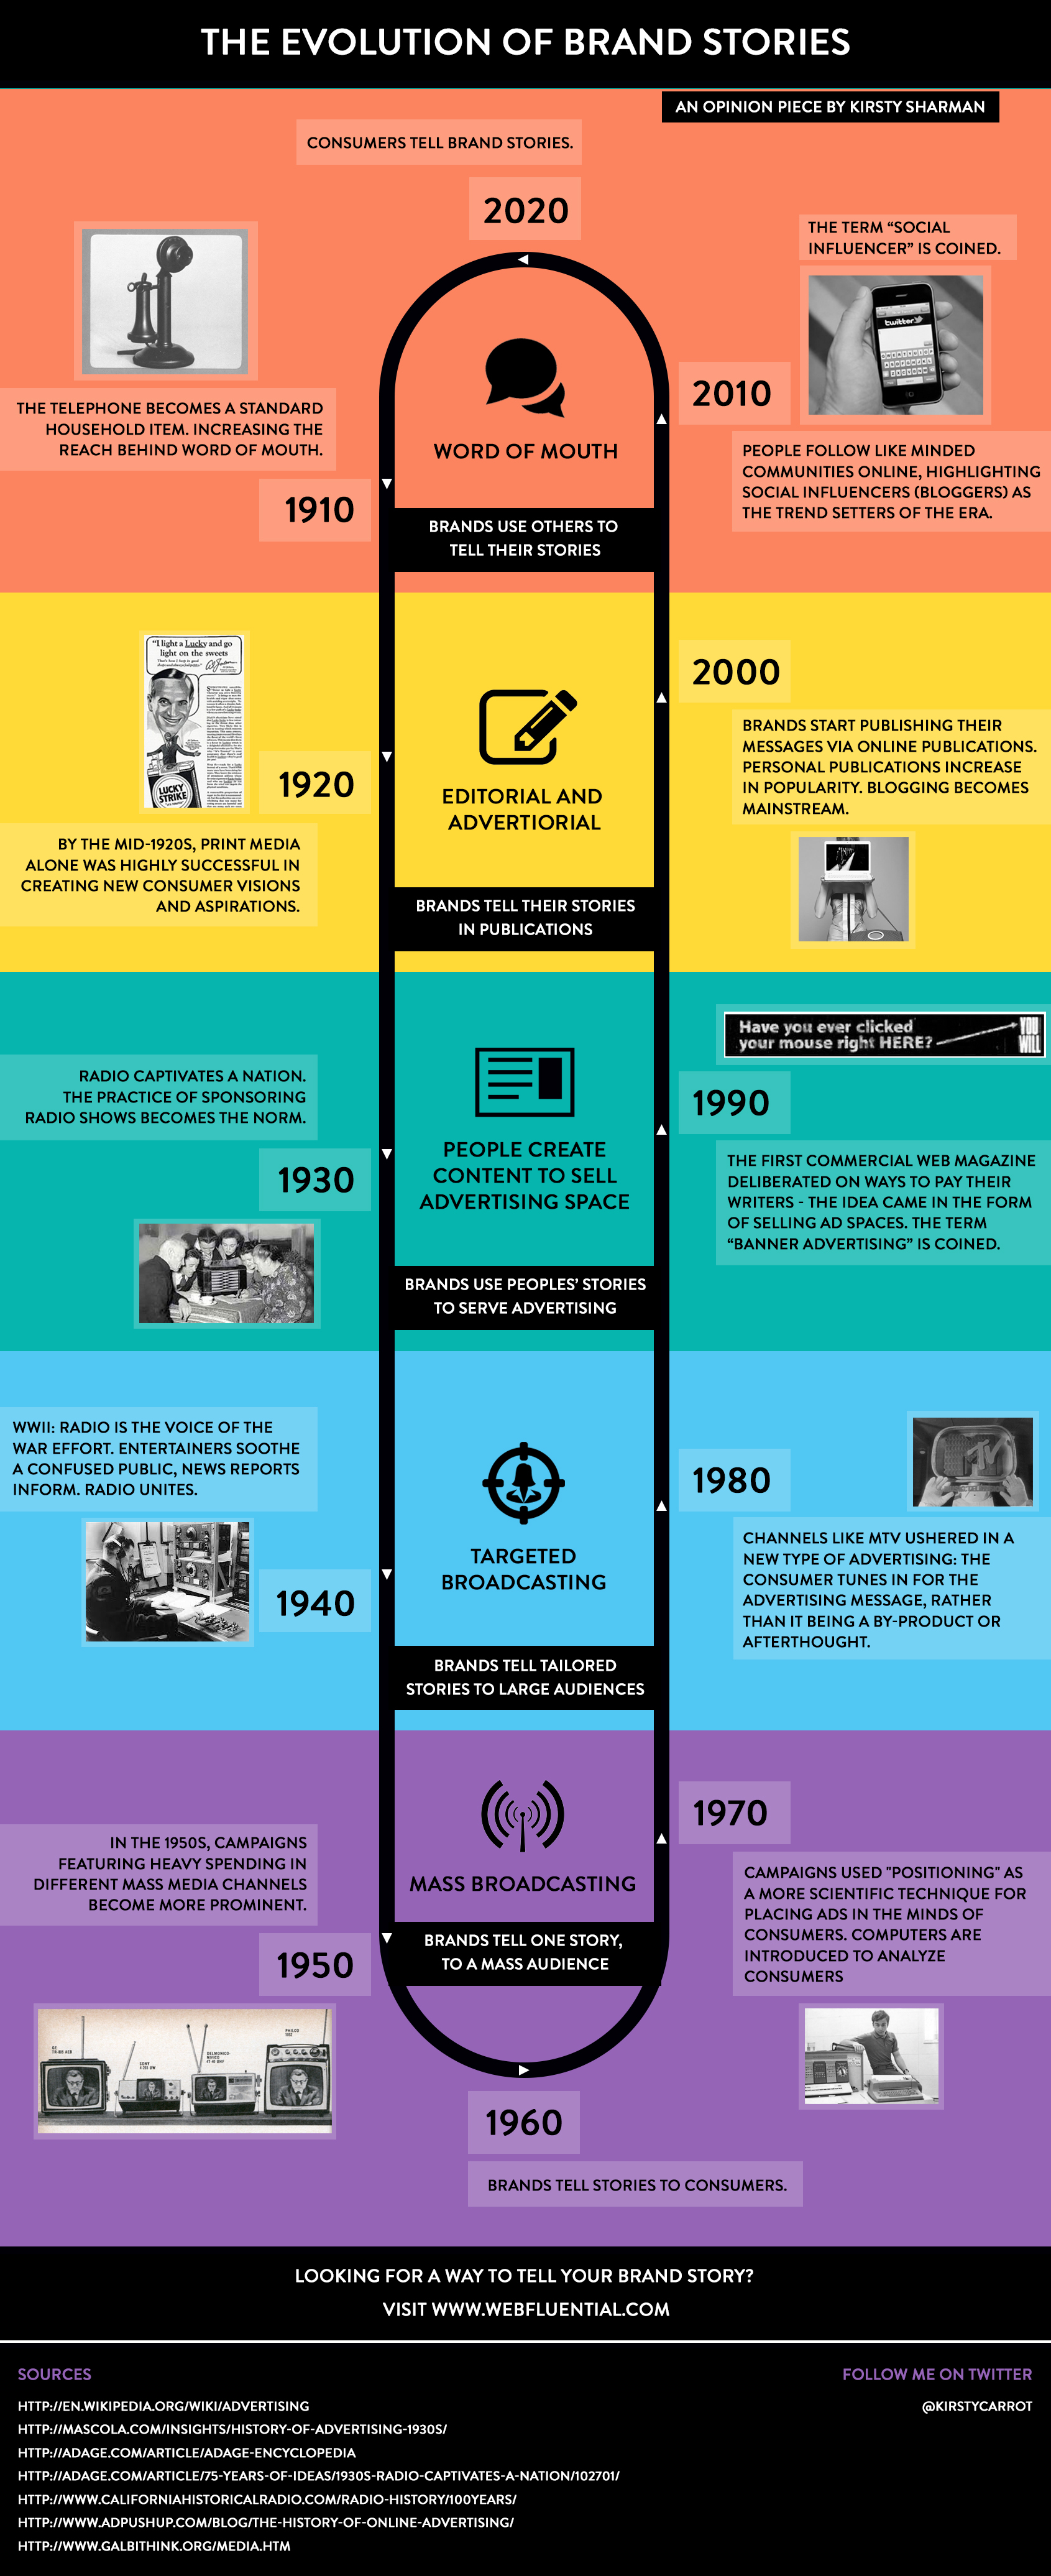 THE-EVOLUTION-OF-BRAND-STORIES